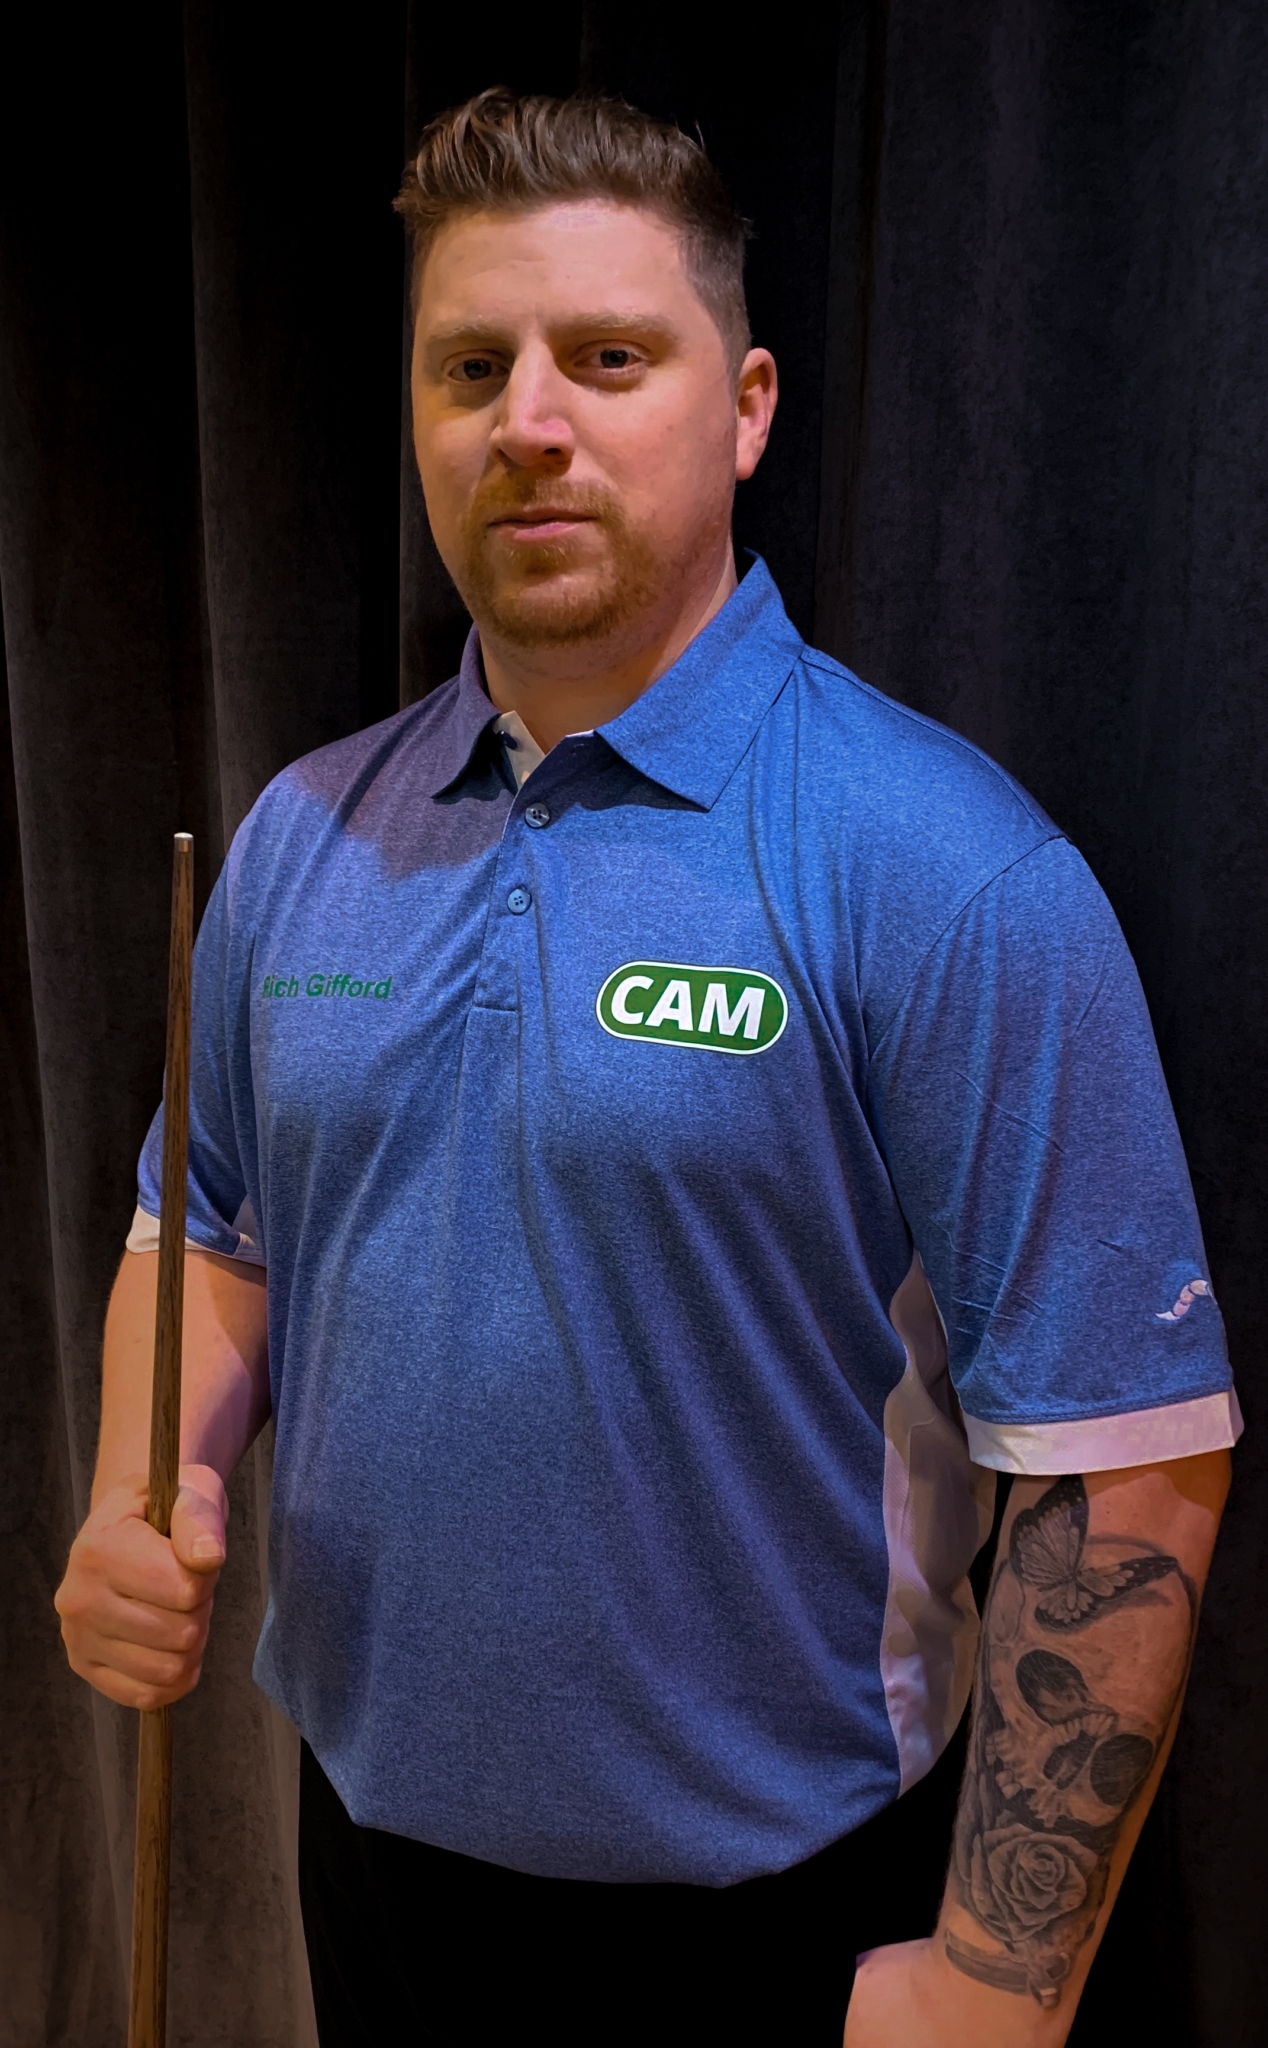 CAM sponsors Gloucestershire pool player